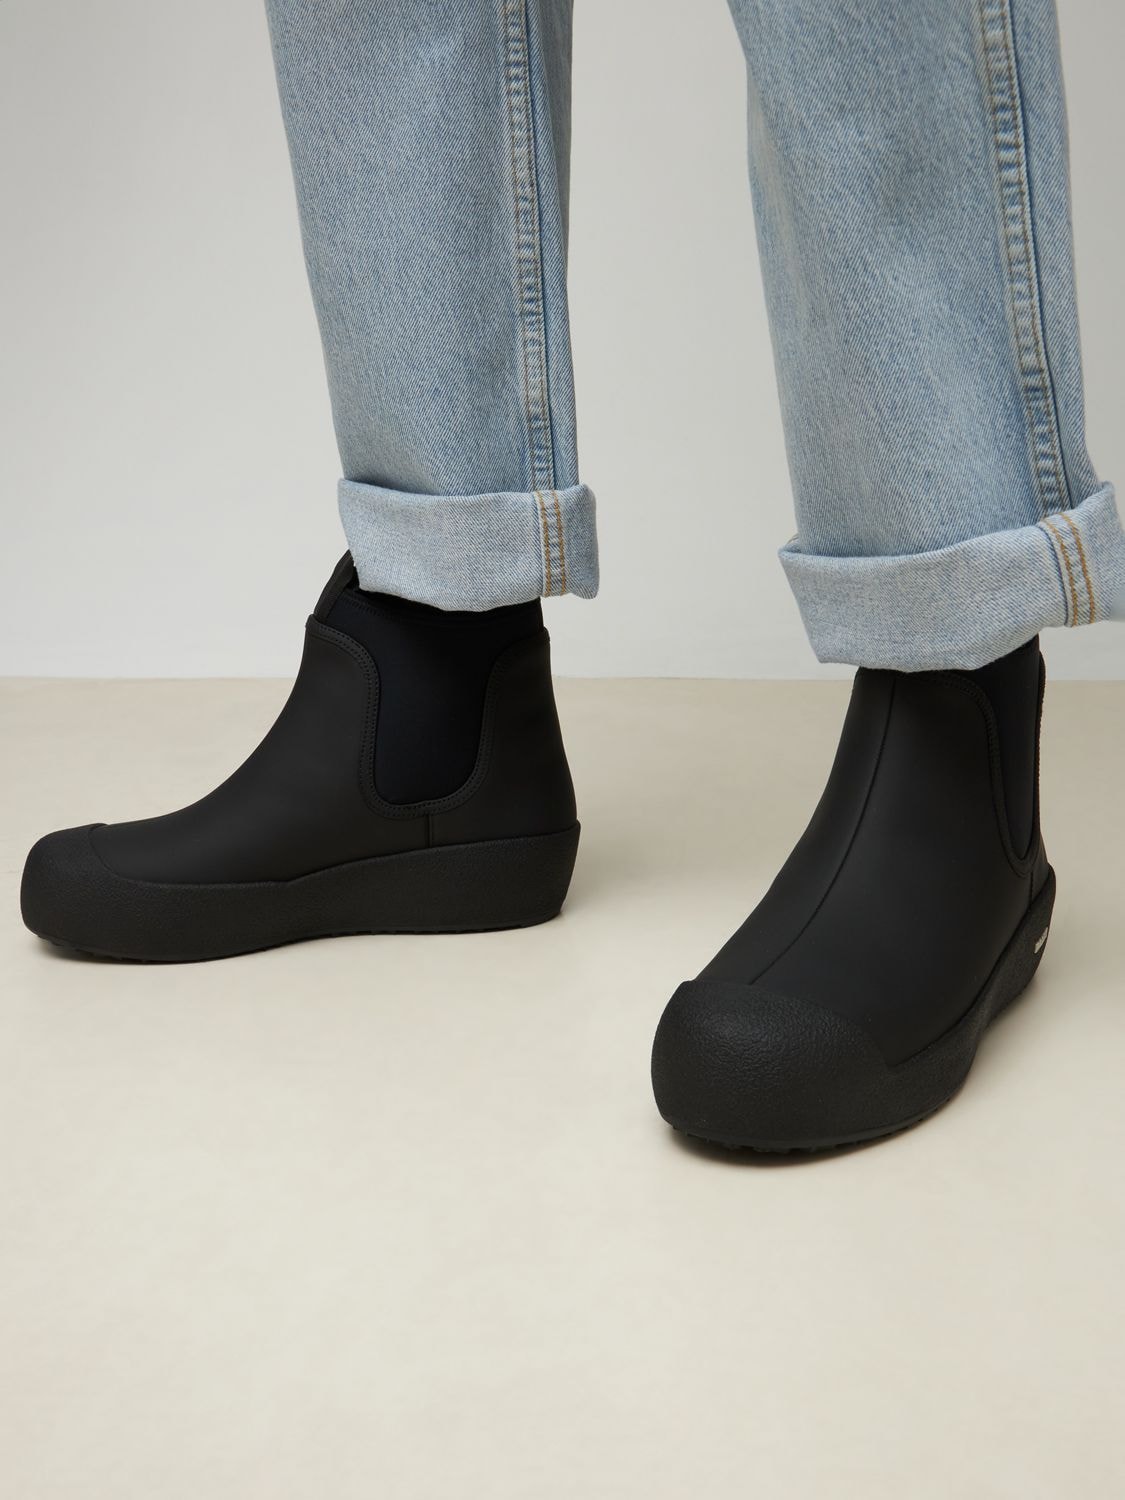 Shop Bally 30mm Gadey Rubberized Leather Boots In Black